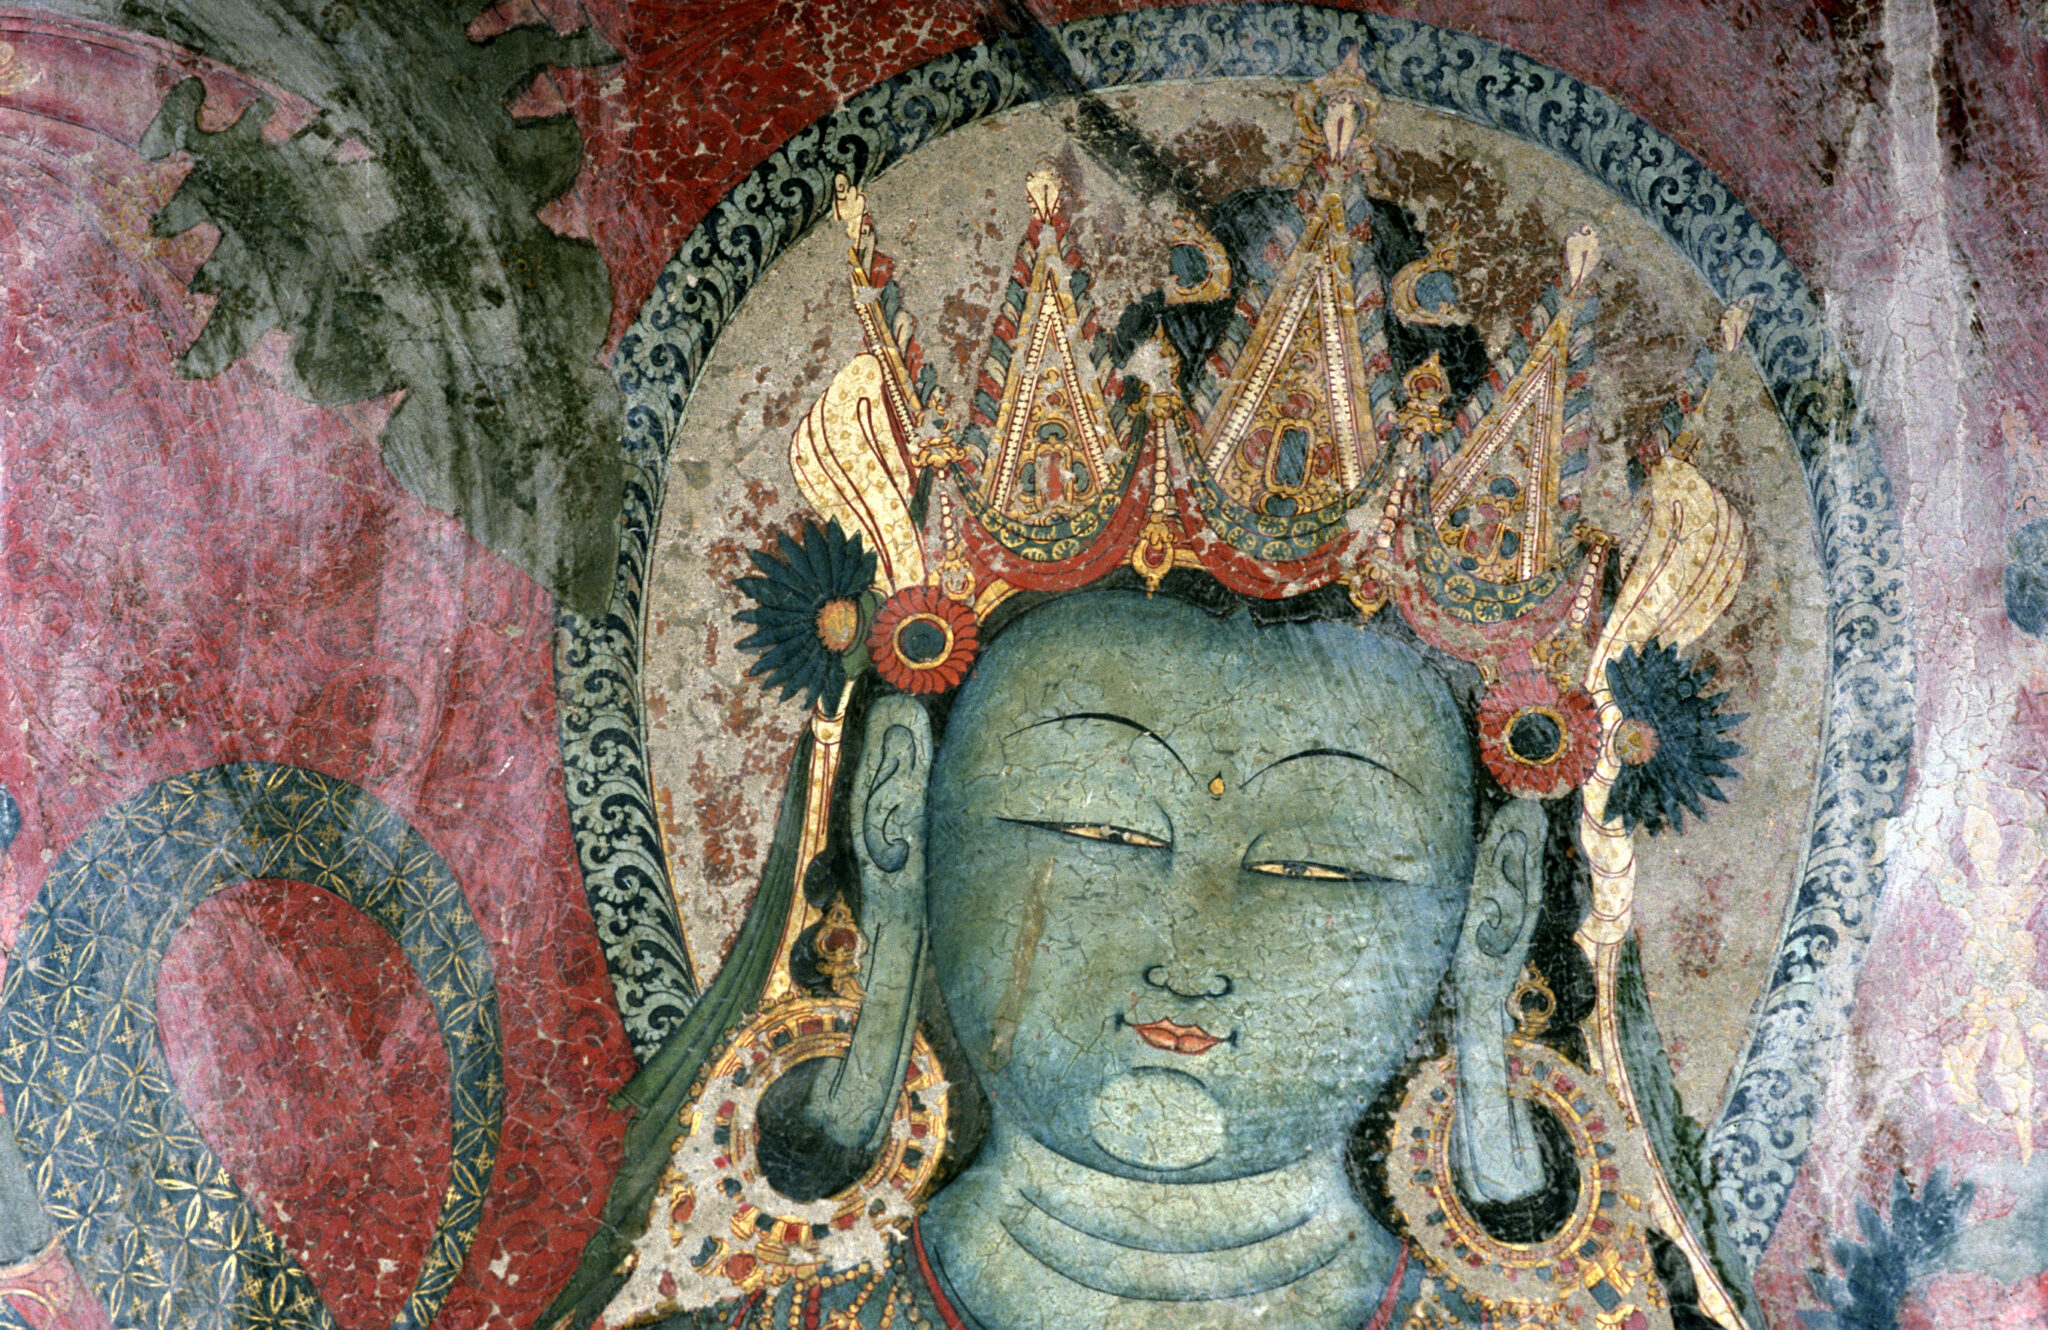 Head of blue-green-skinned deity wearing gilded crown and heavy earrings against red background